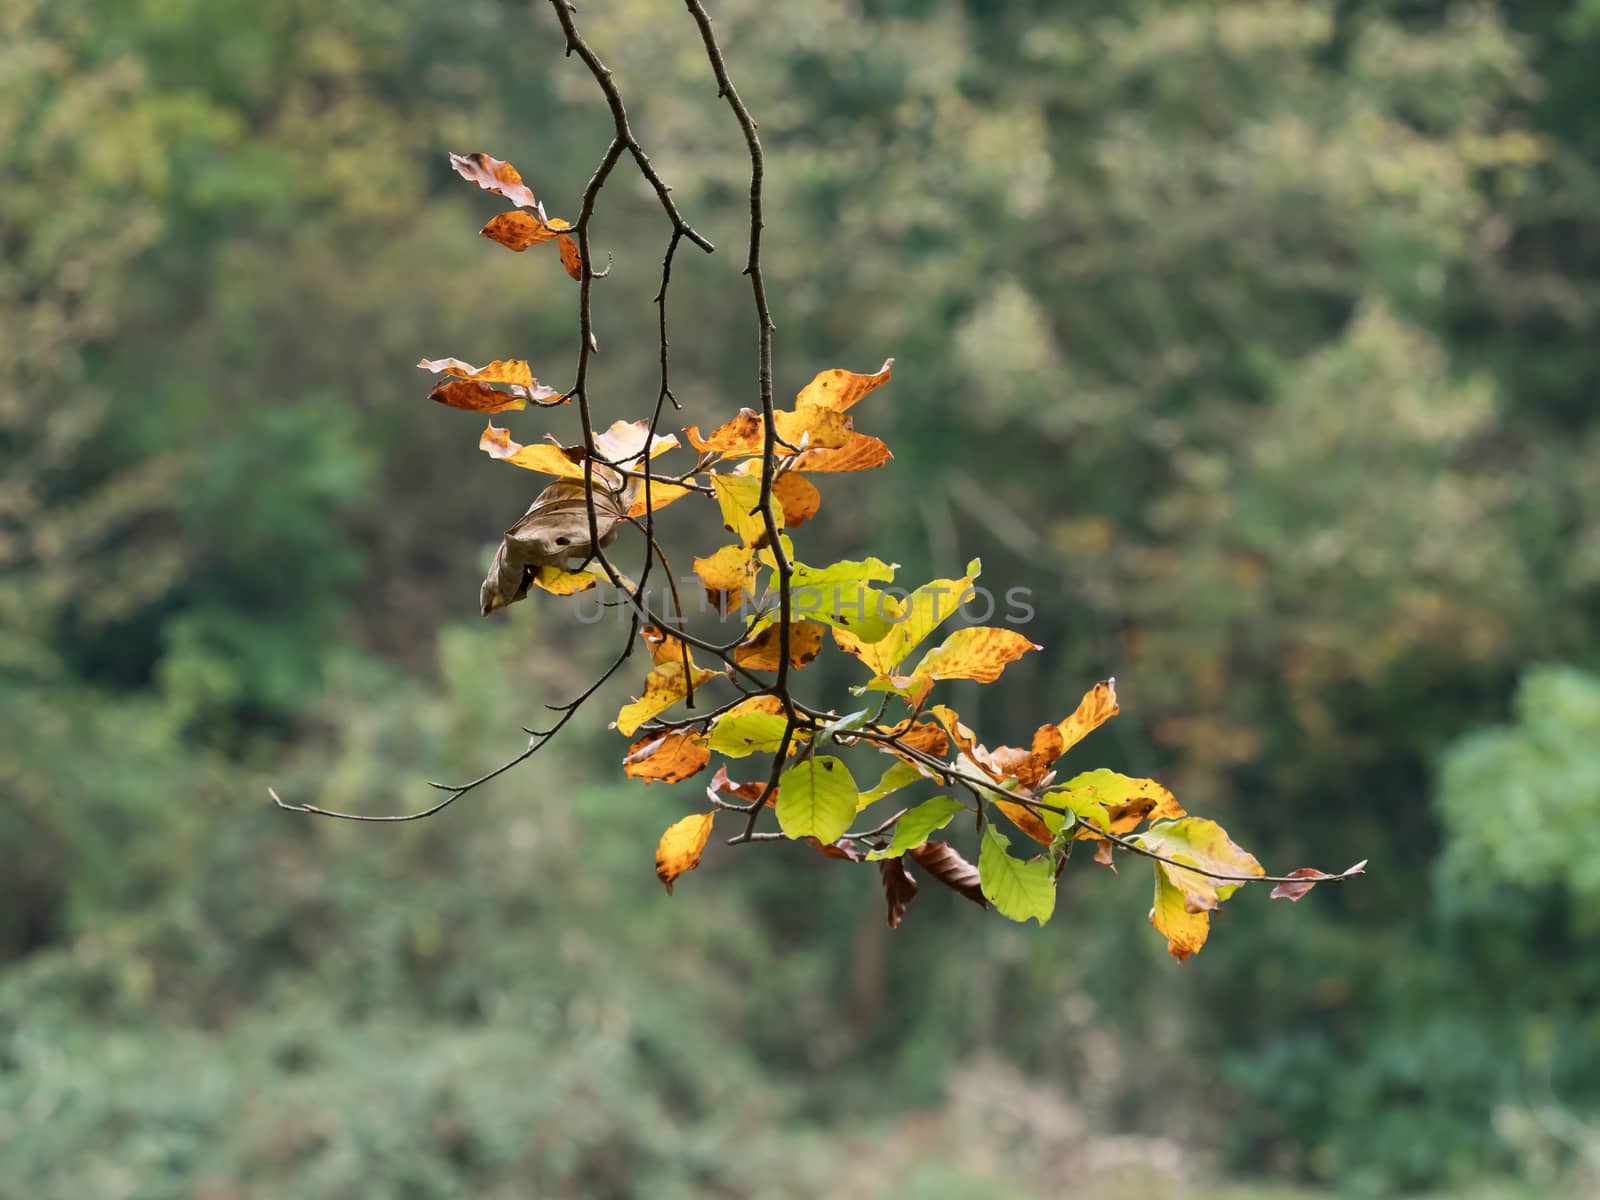 Beech Leaves on tree branch in Autumn.